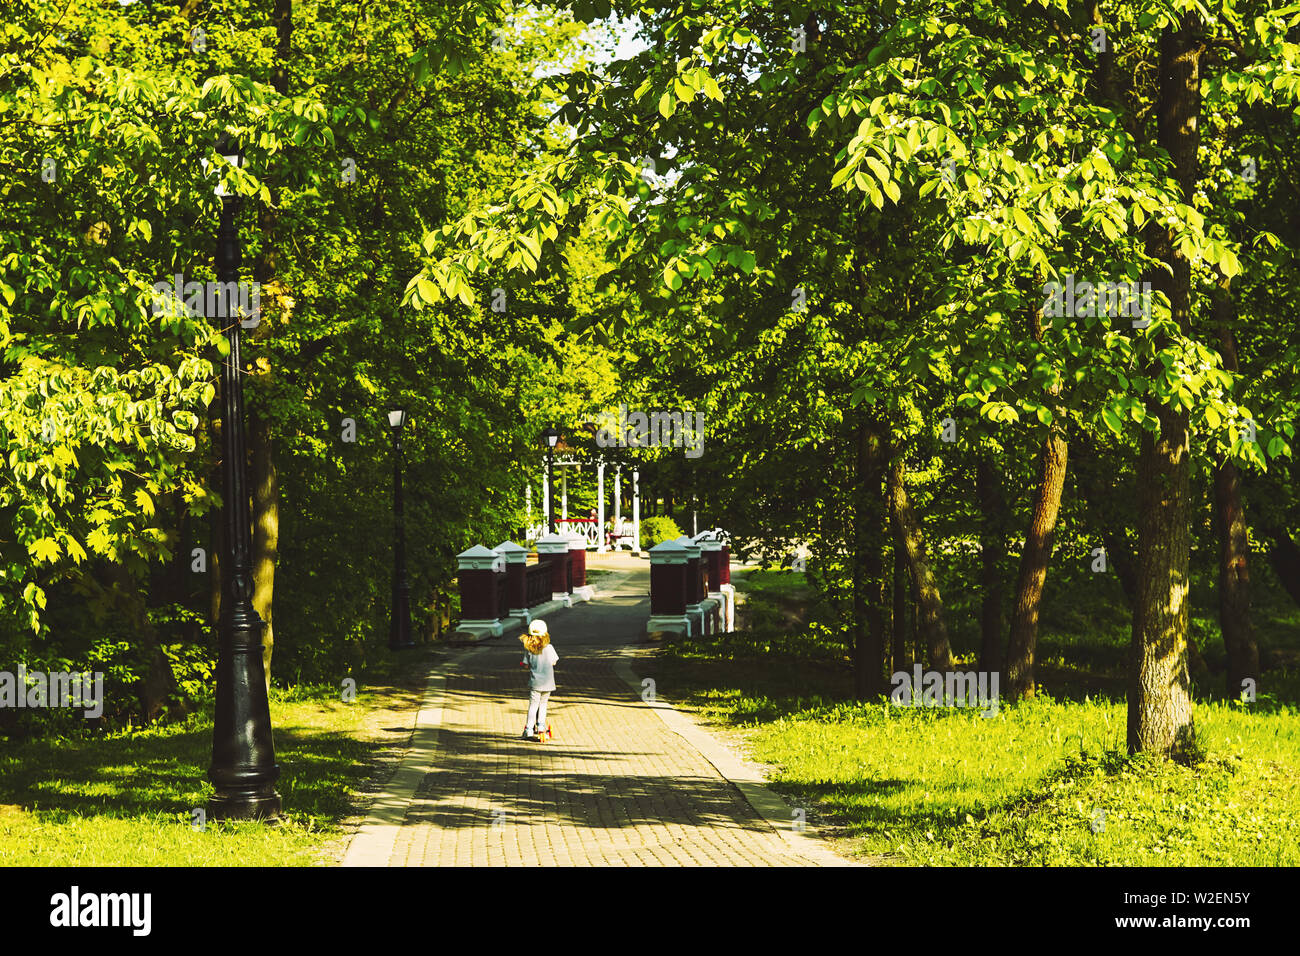 A little girl in the park rides a scooter on the road among thick bright green trees. Stock Photo